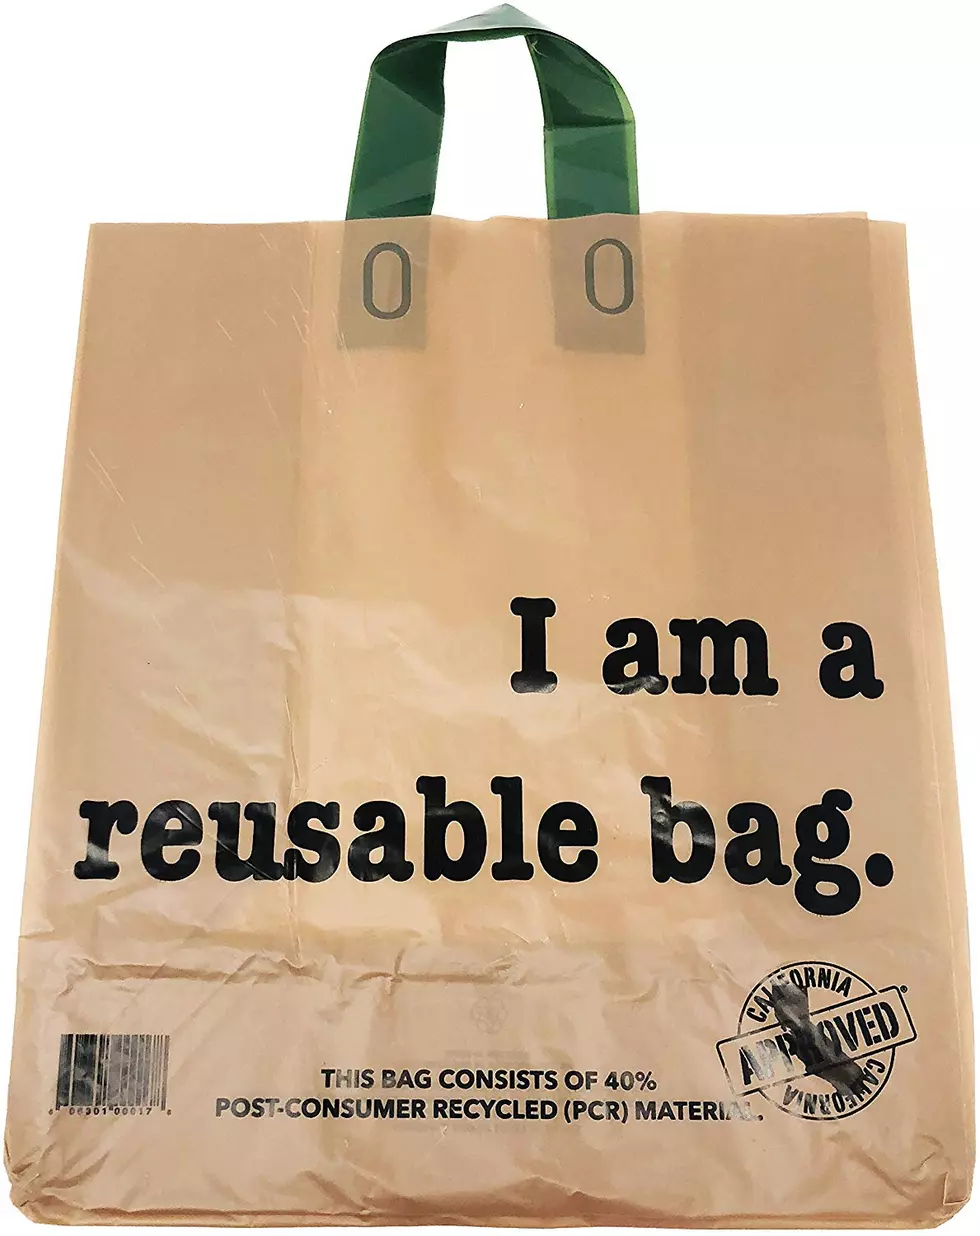 Here Comes the NY State Single-Use Plastic Bag Ban